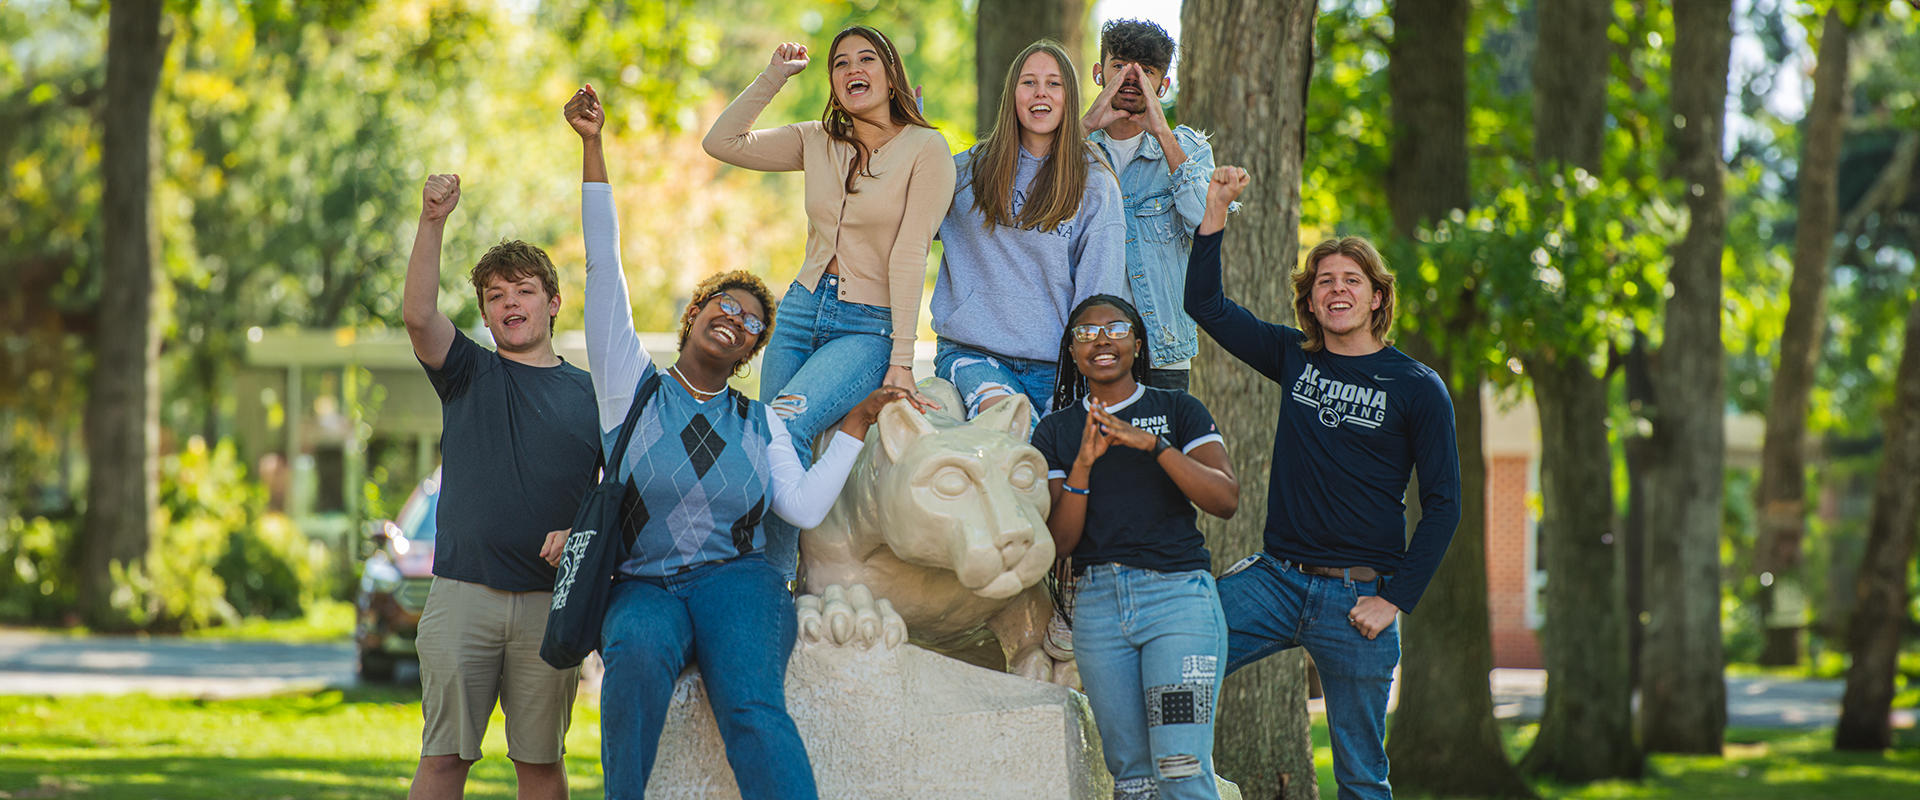 Penn State Altoona students pose for a picture at the campus lion shrine